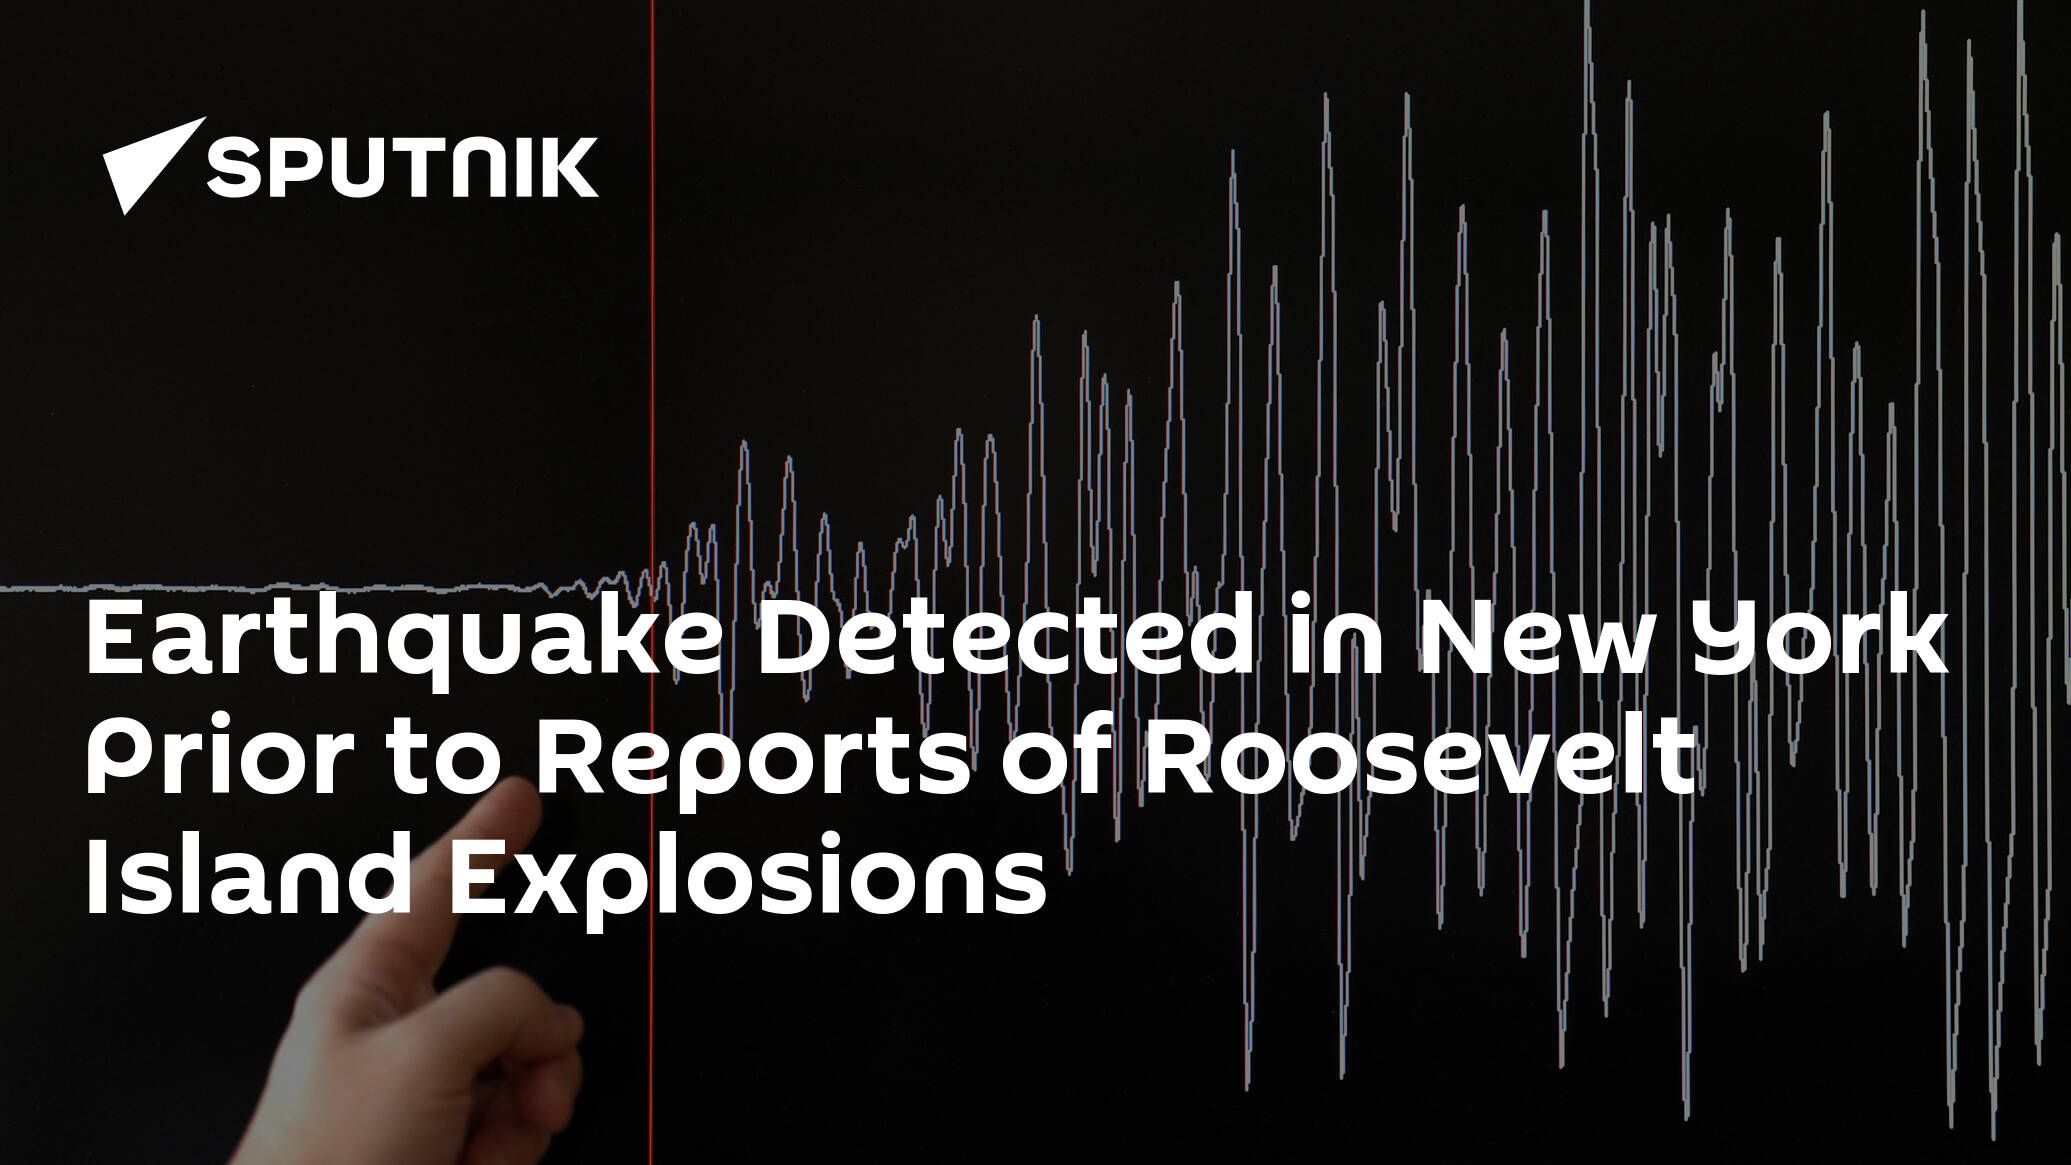 Earthquake Detected in New York Prior to Reports of Roosevelt Island Explosions